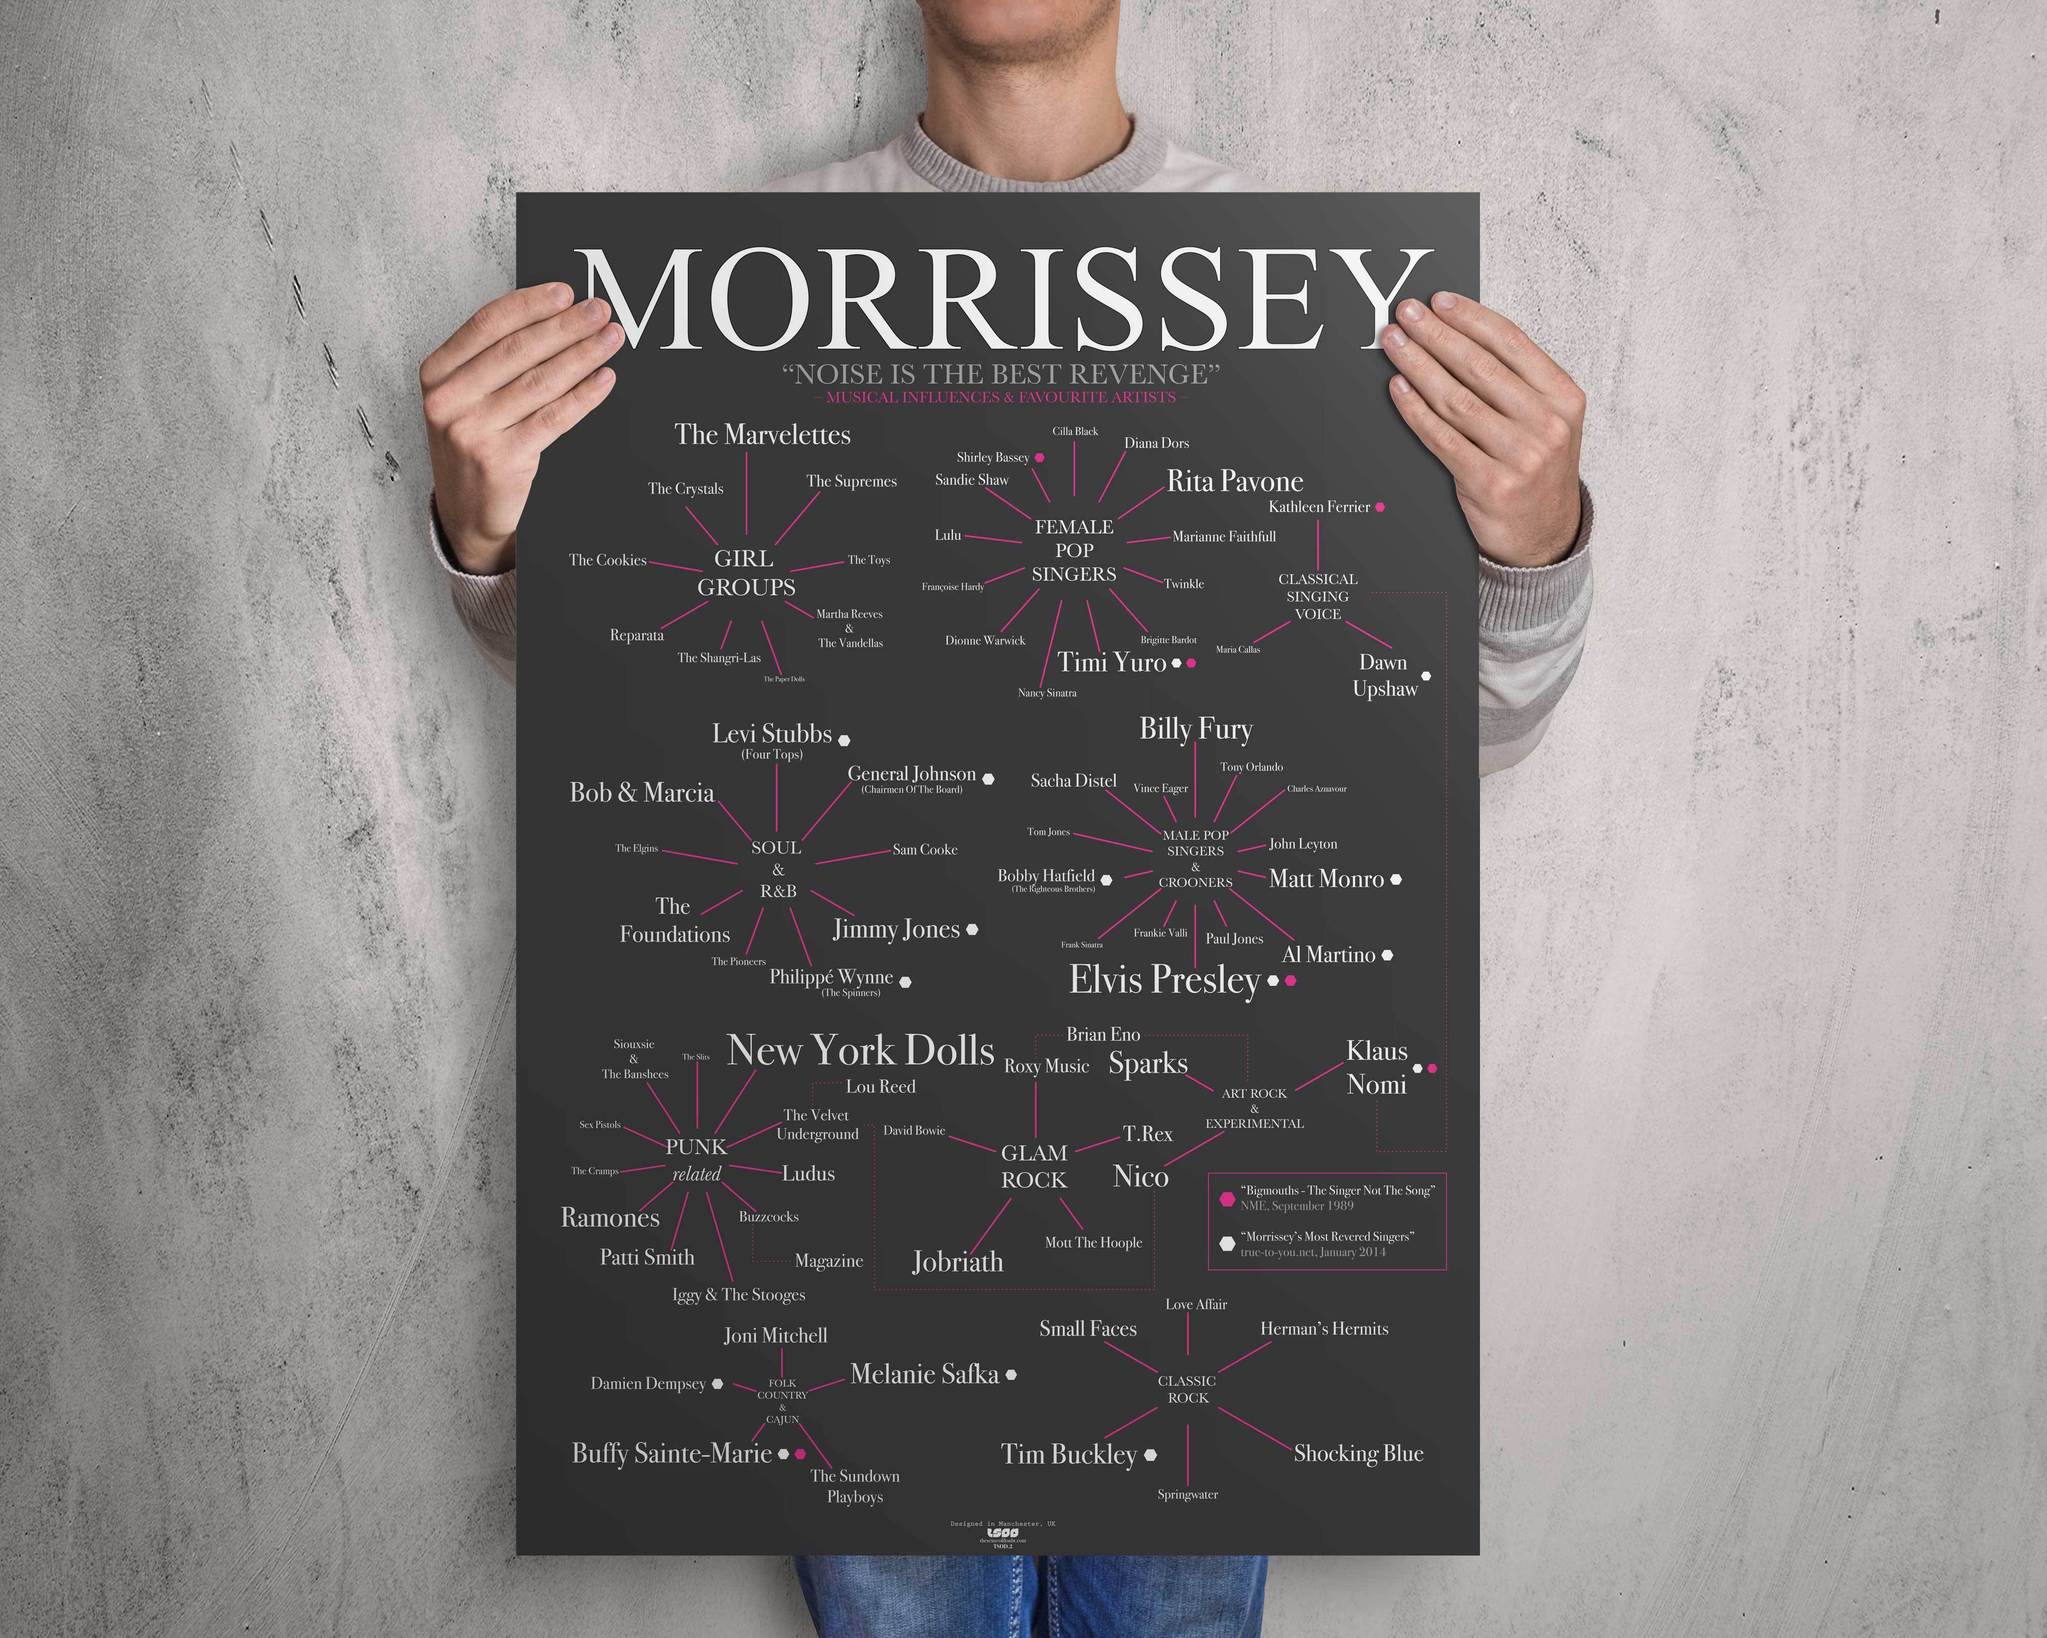 Morrissey - Musical Influences [Compact Edition]